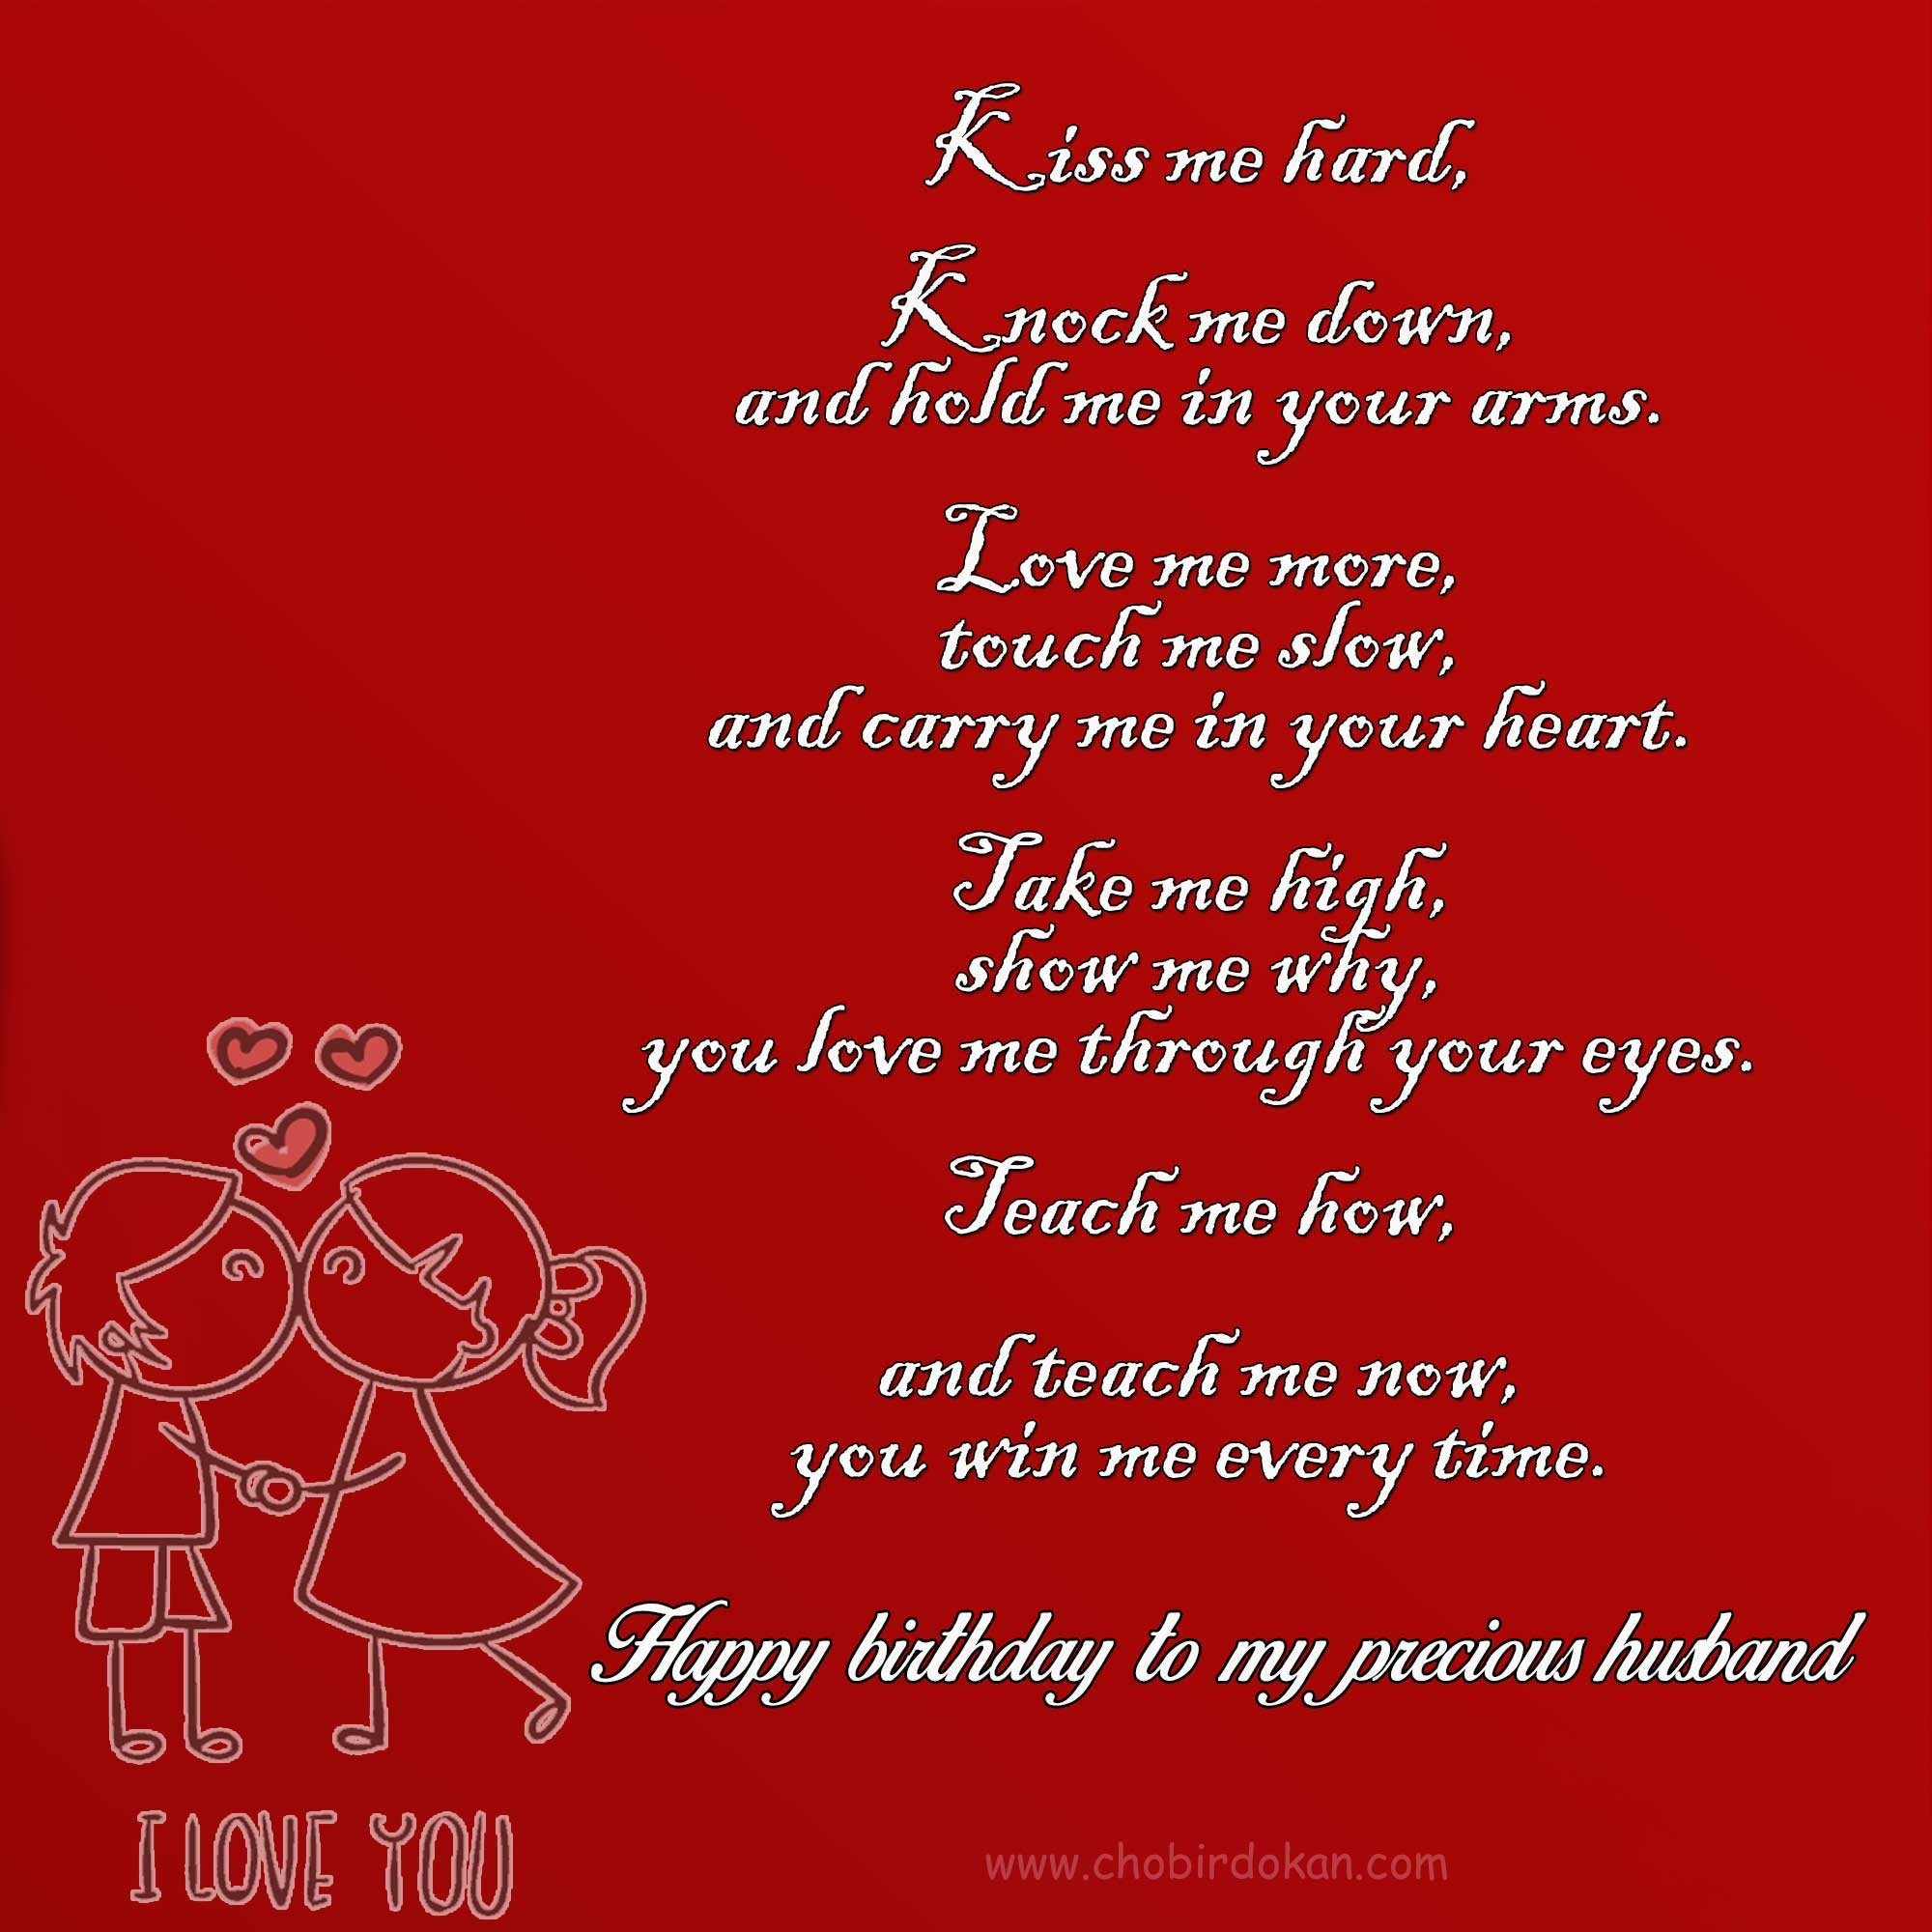 Â - Love Quotes Birthday Husband , HD Wallpaper & Backgrounds